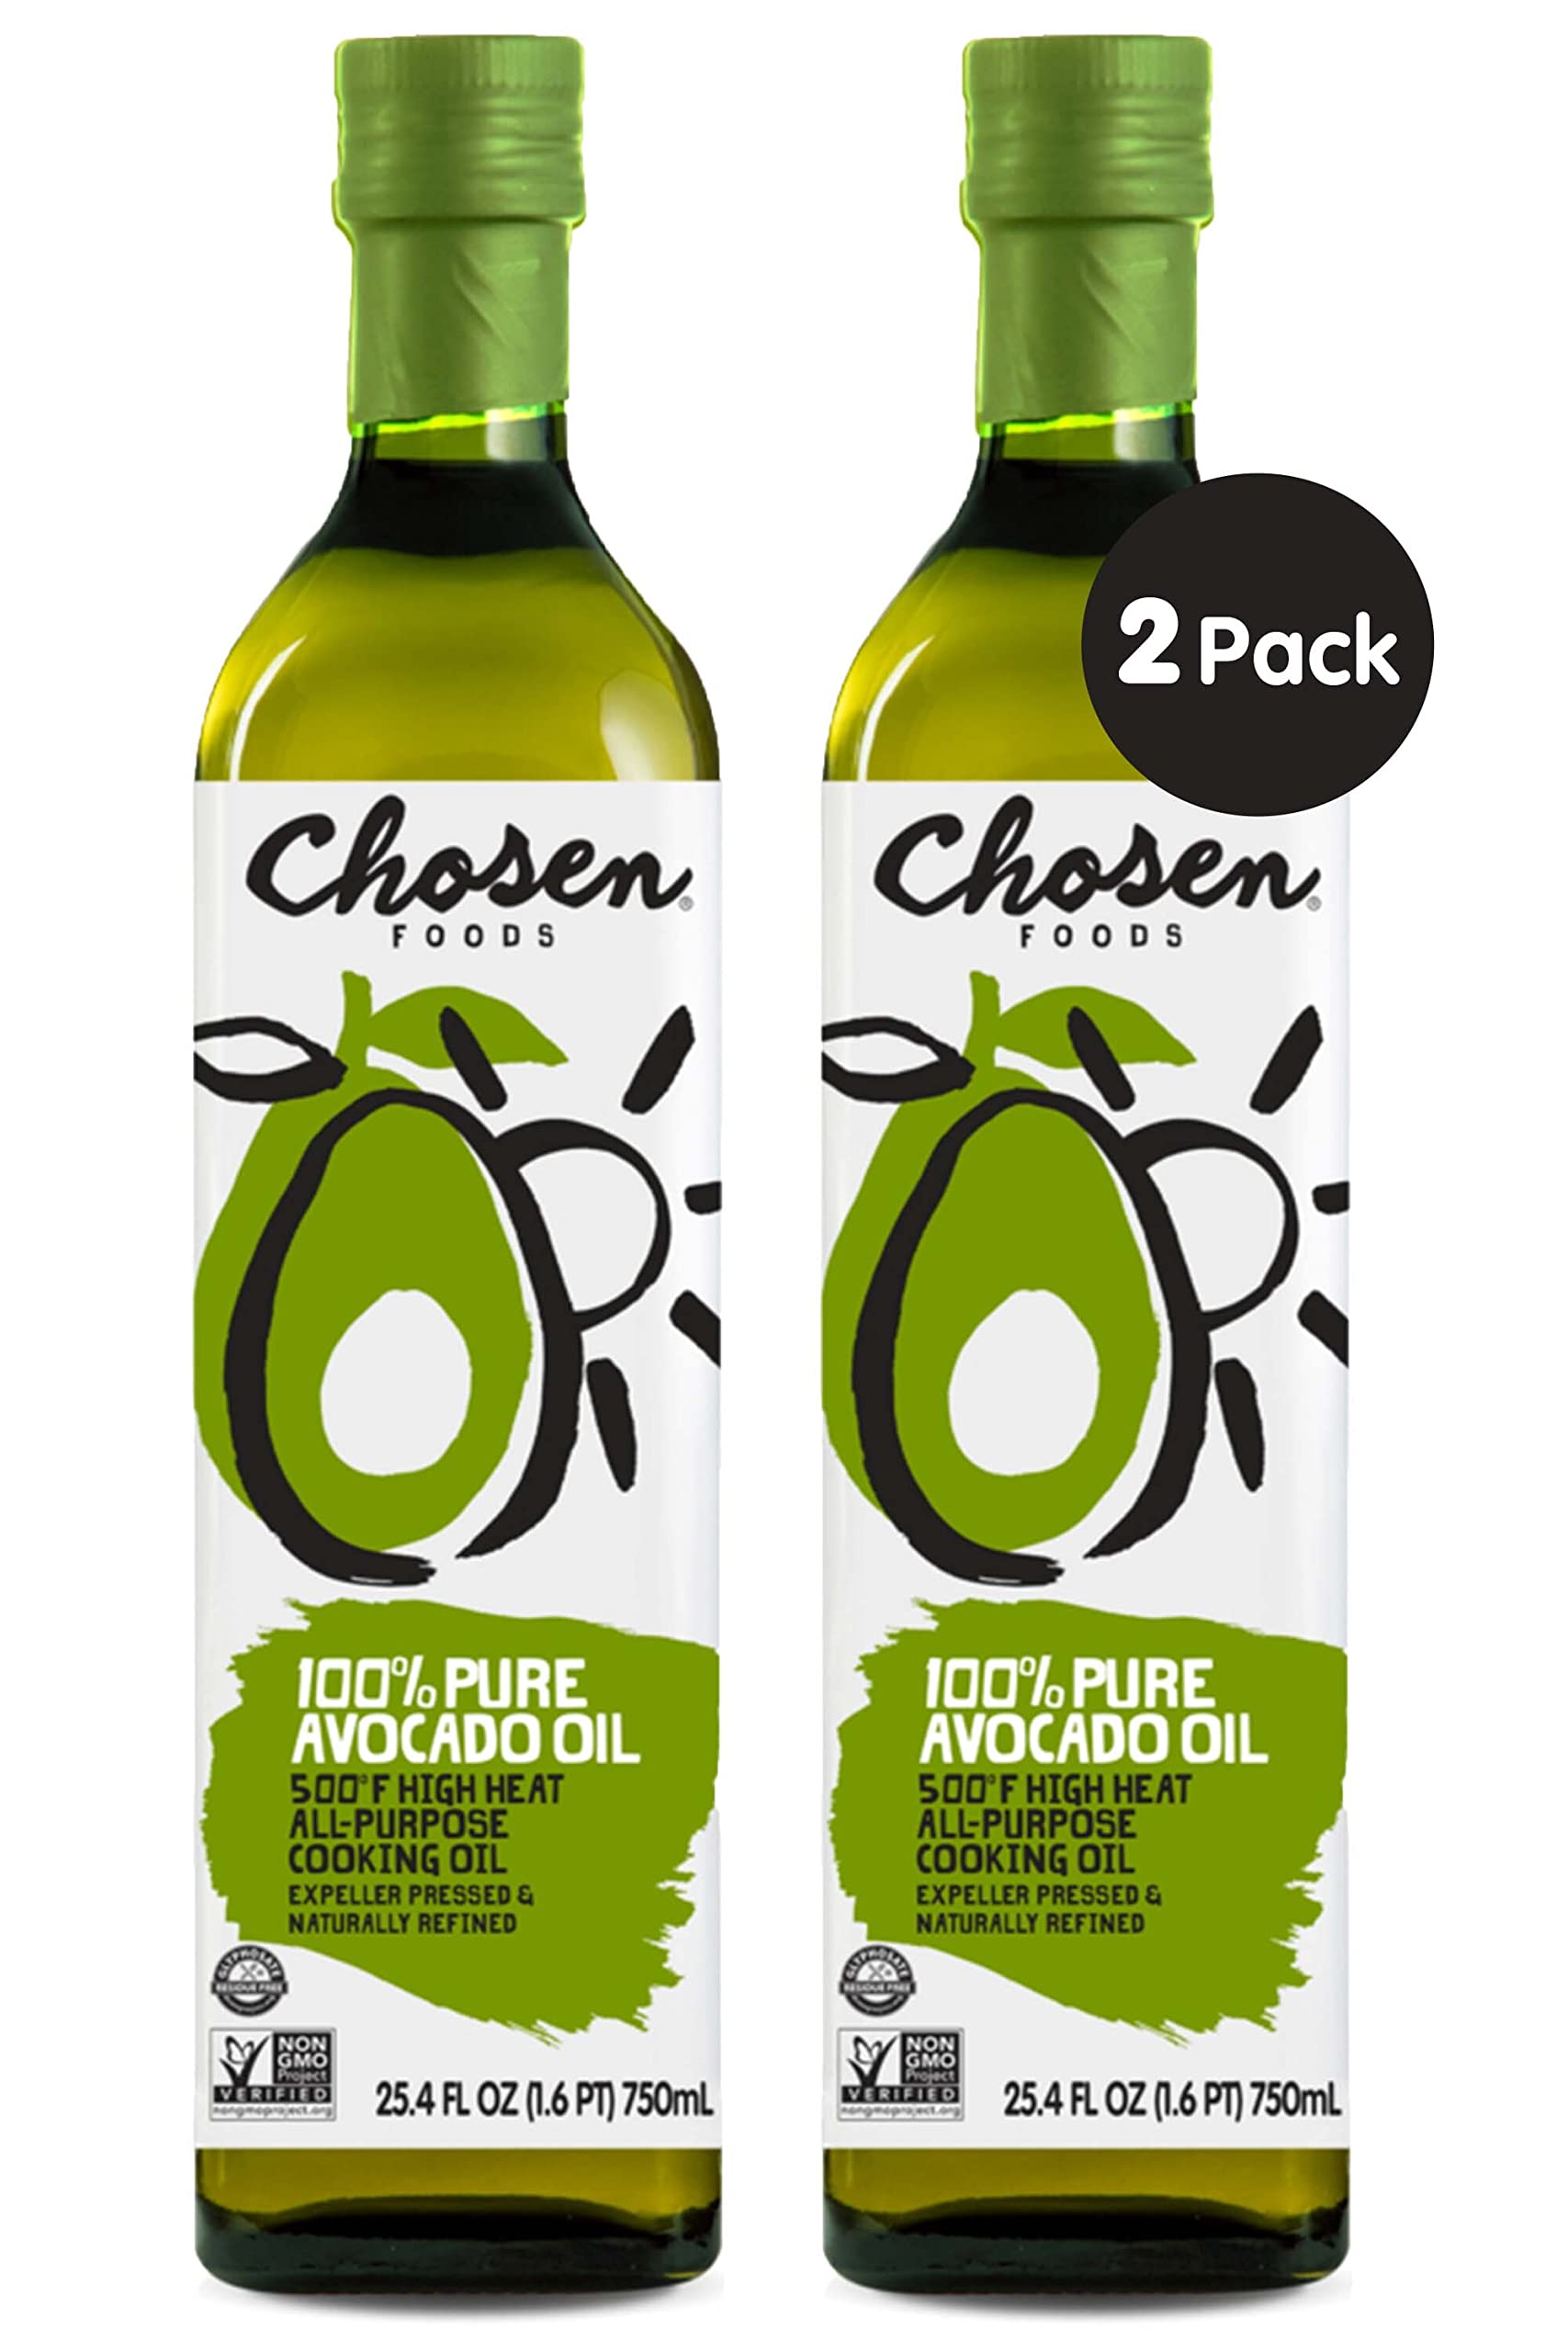 Chosen Foods 100% Pure Avocado Oil, Keto and Paleo Diet Friendly, Kosher Oil  for Baking, High-Heat Cooking, Frying, Homemade Sauces, Dressings and  Marinades (25.4 fl oz, 2 Pack) 25.4 Fl Oz (Pack of 2)